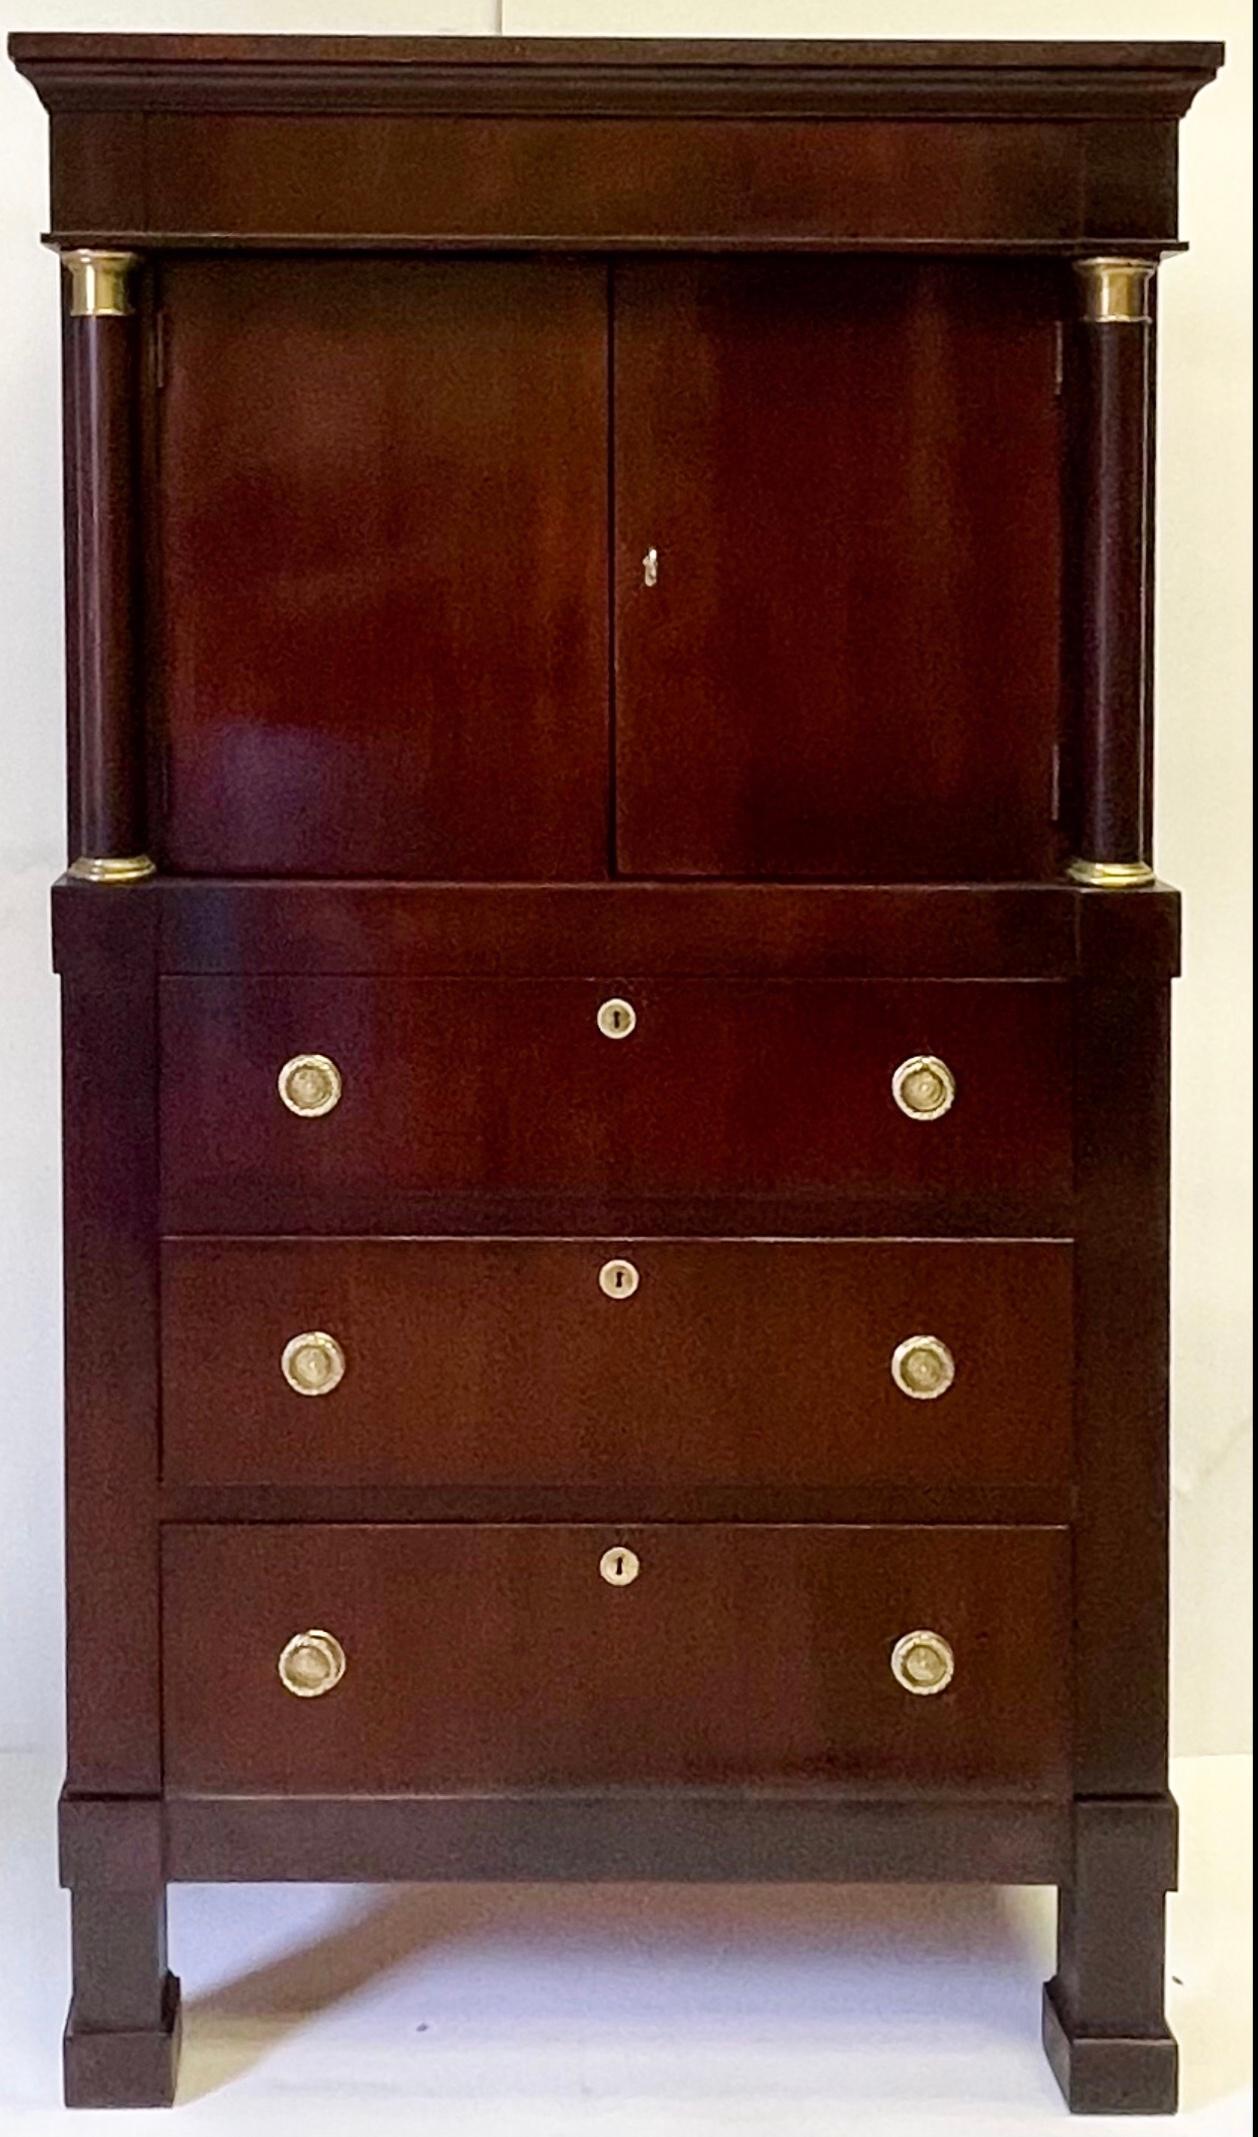 Neoclassical Neo-Classical Style Gentleman’s Chest by Ralph Lauren for Henredon